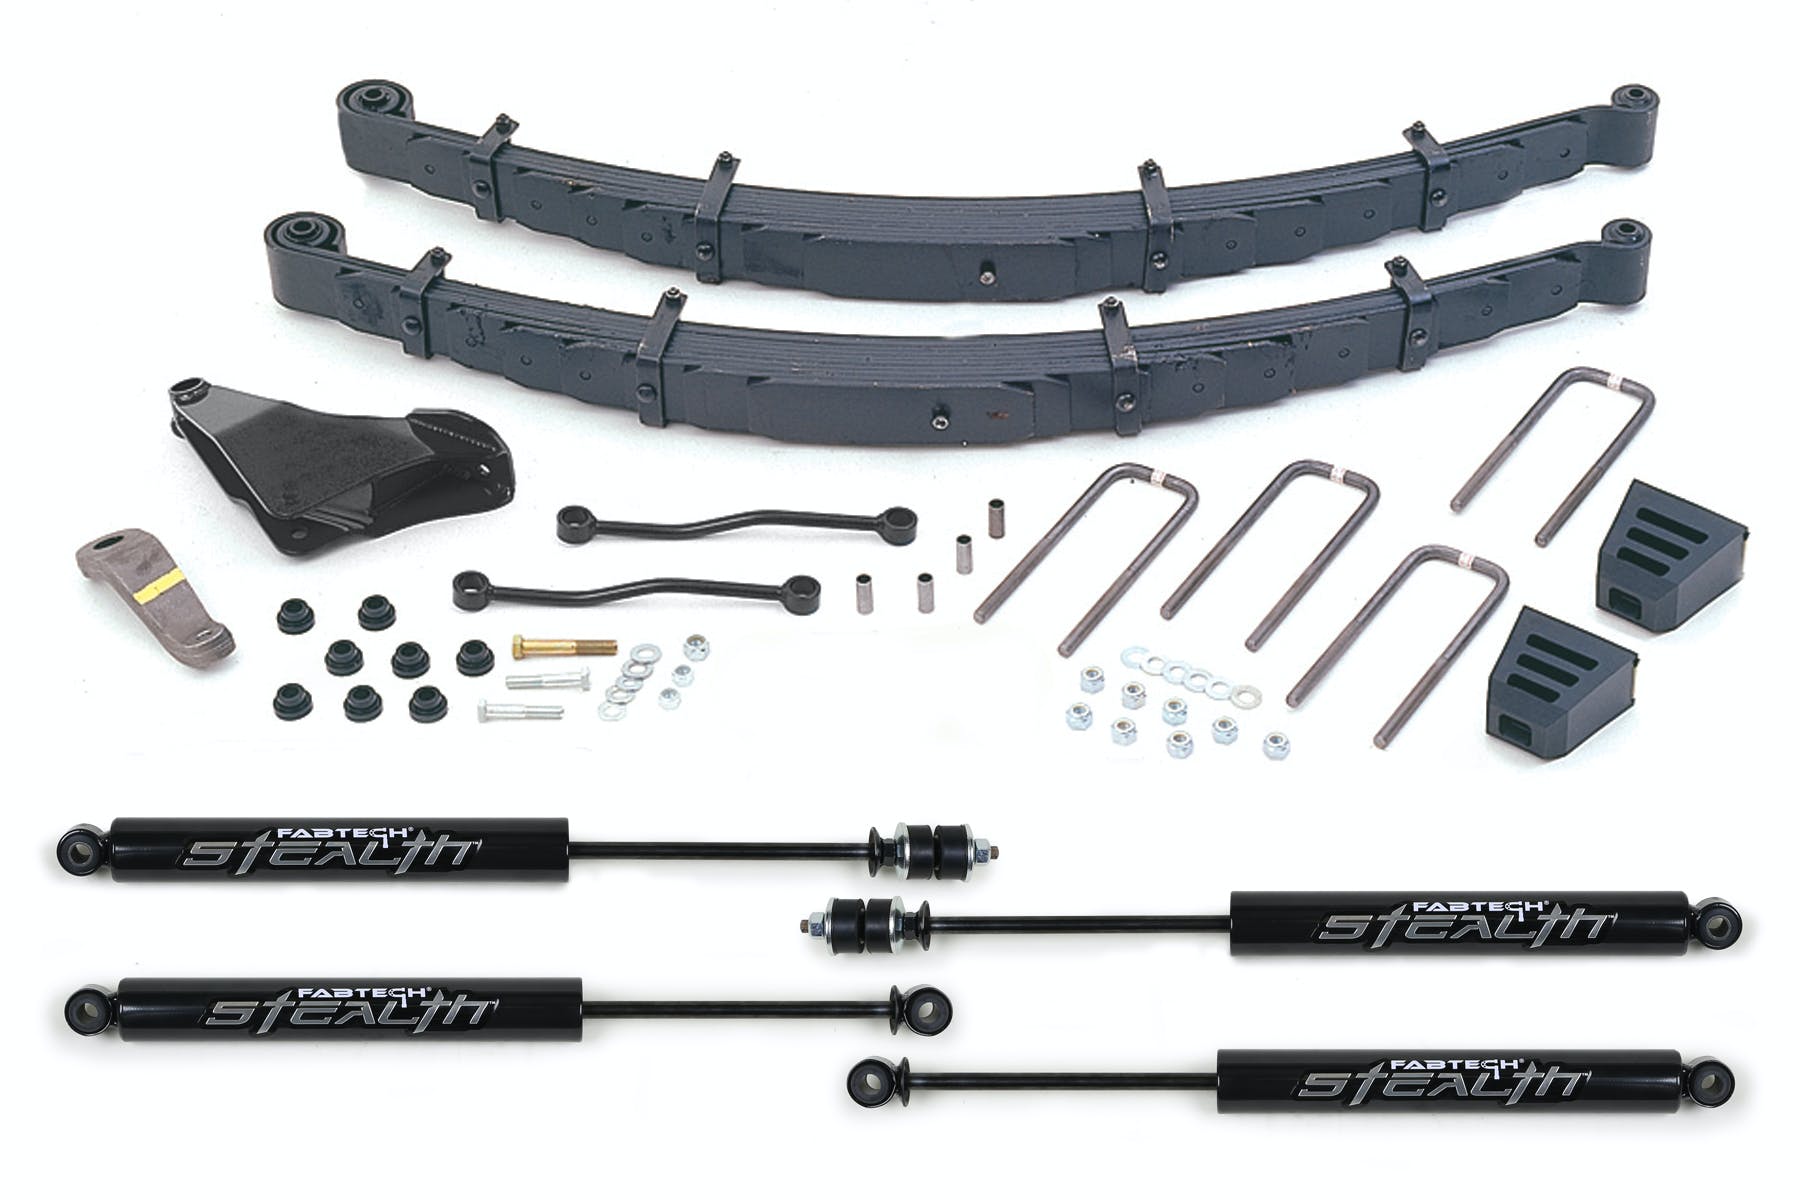 Fabtech K2087M 8in. PERF SYS W/STEALTH 00-04 FORD F250/350 4WD W/7.3L DIESEL